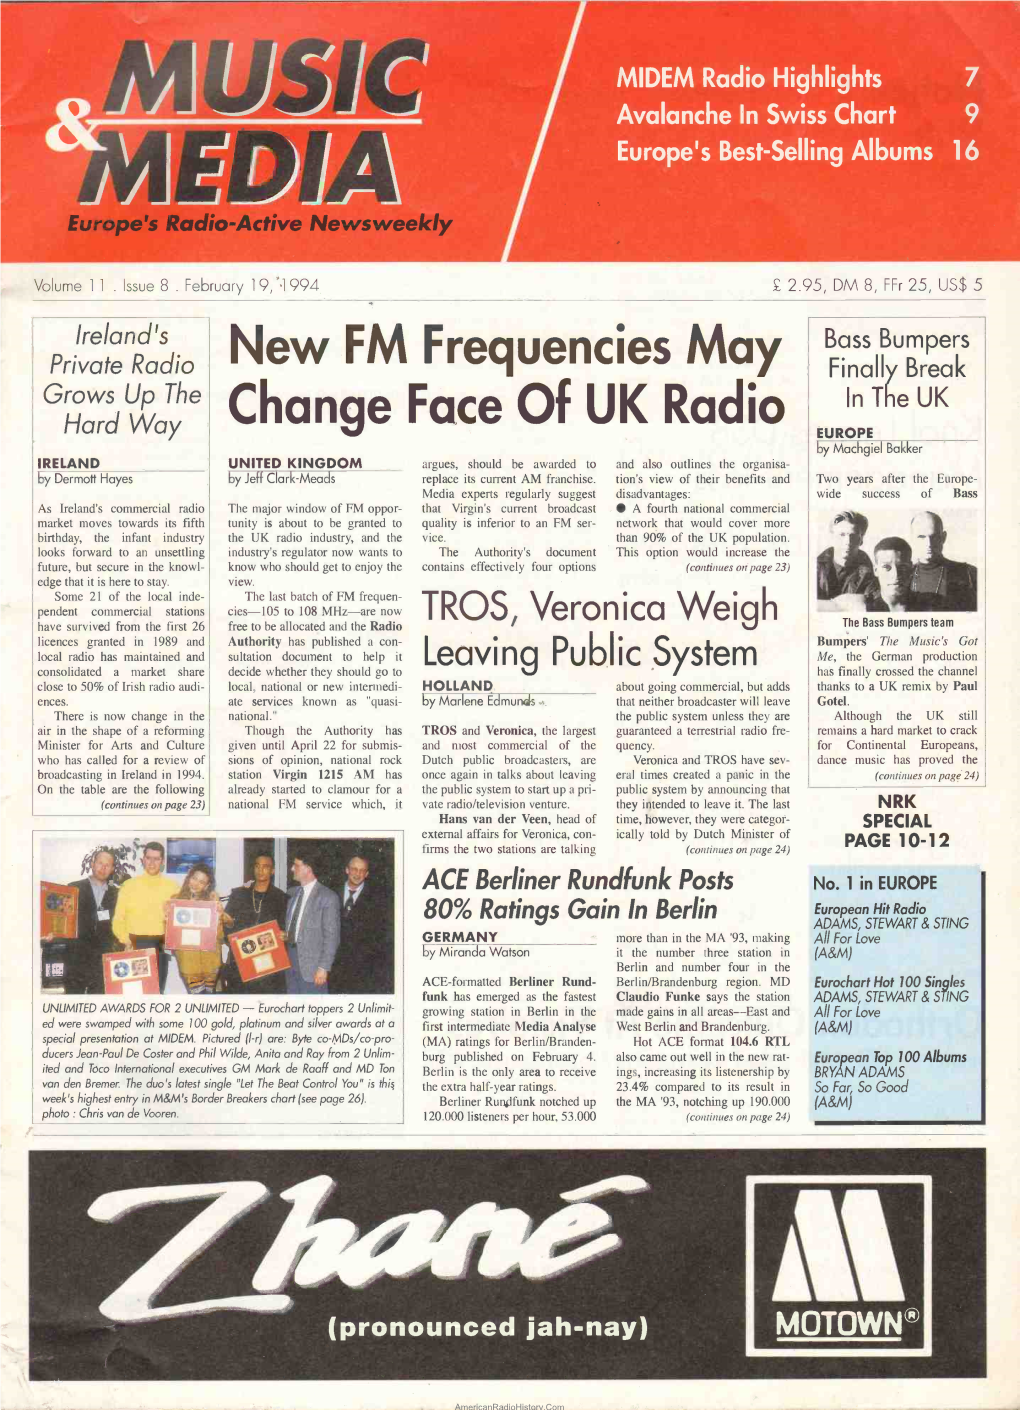 New FM Frequencies May Change Face of UK Radio